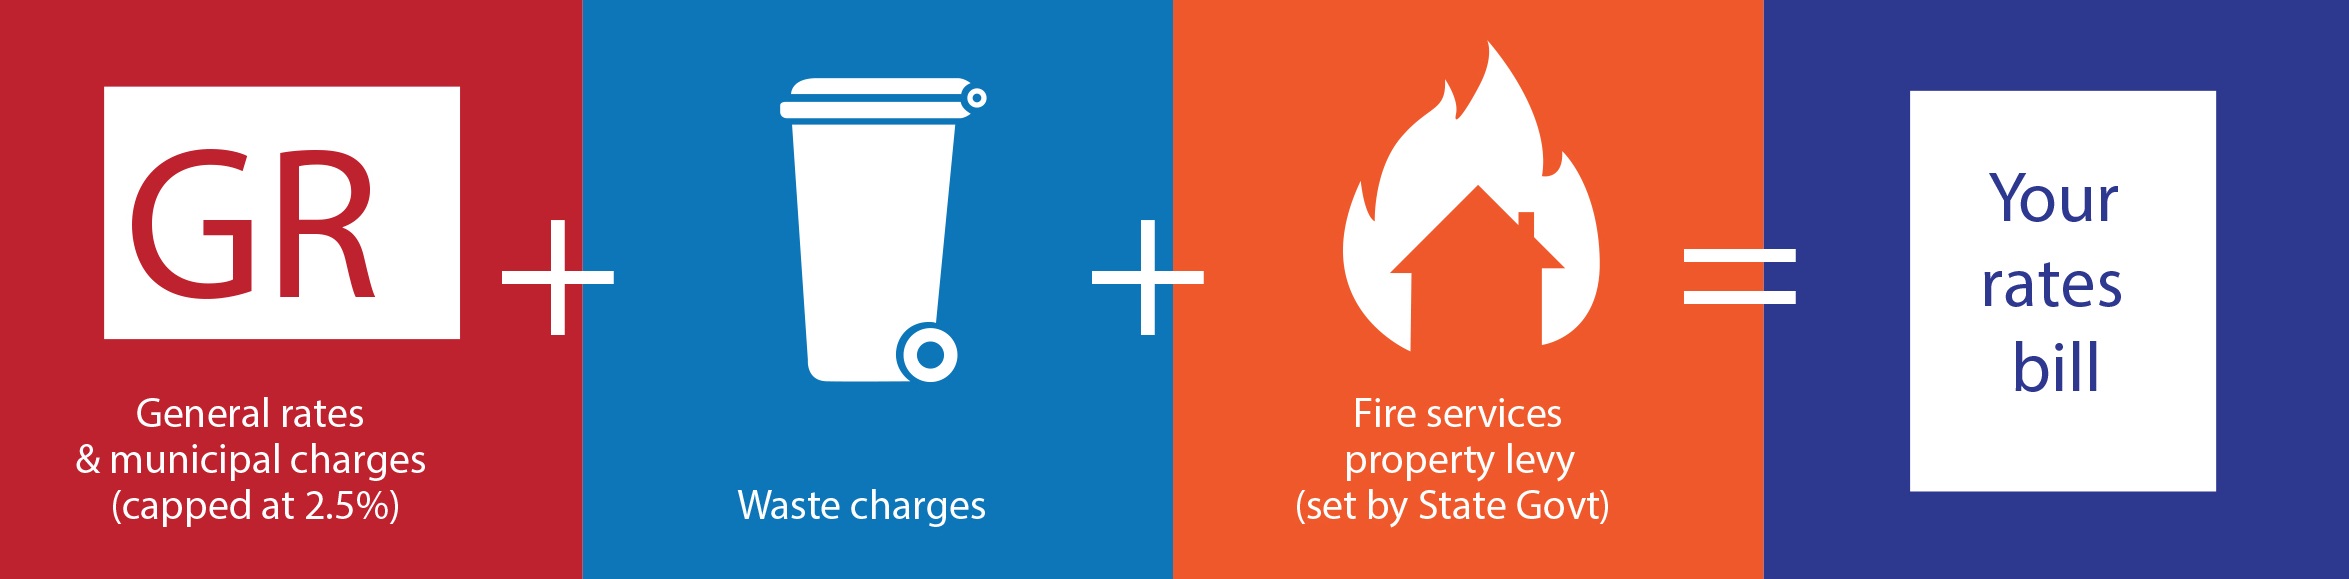 Components of your annual rates bill: General rates and municipal charges (capped) + Waste charges + Fire services property levy (set by State government) equals your rates bill